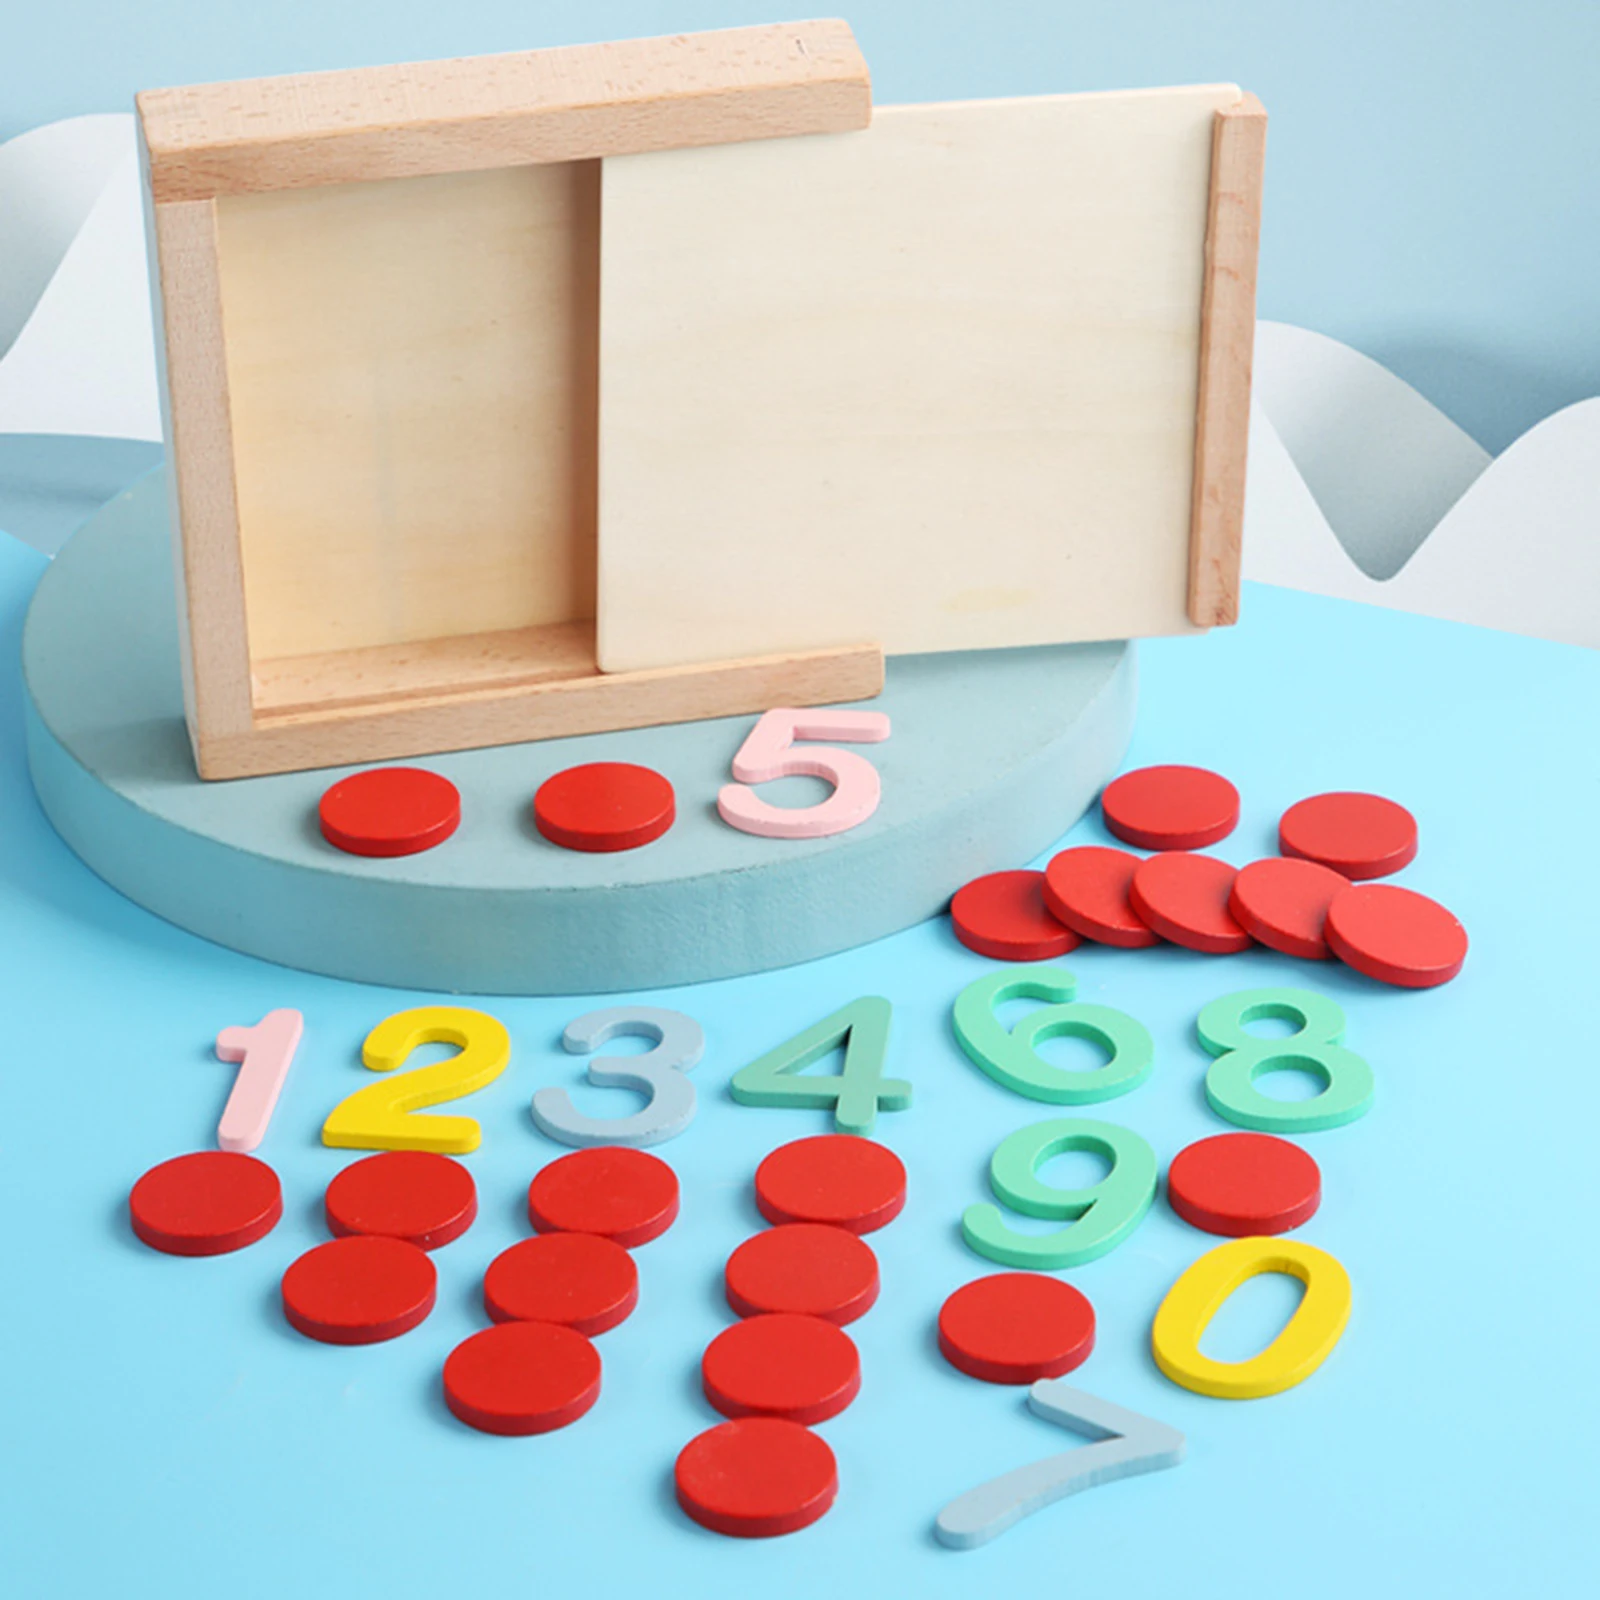 Wooden Math Counting Toy Educational for Kindergarten Home 3 4 5 Year Old